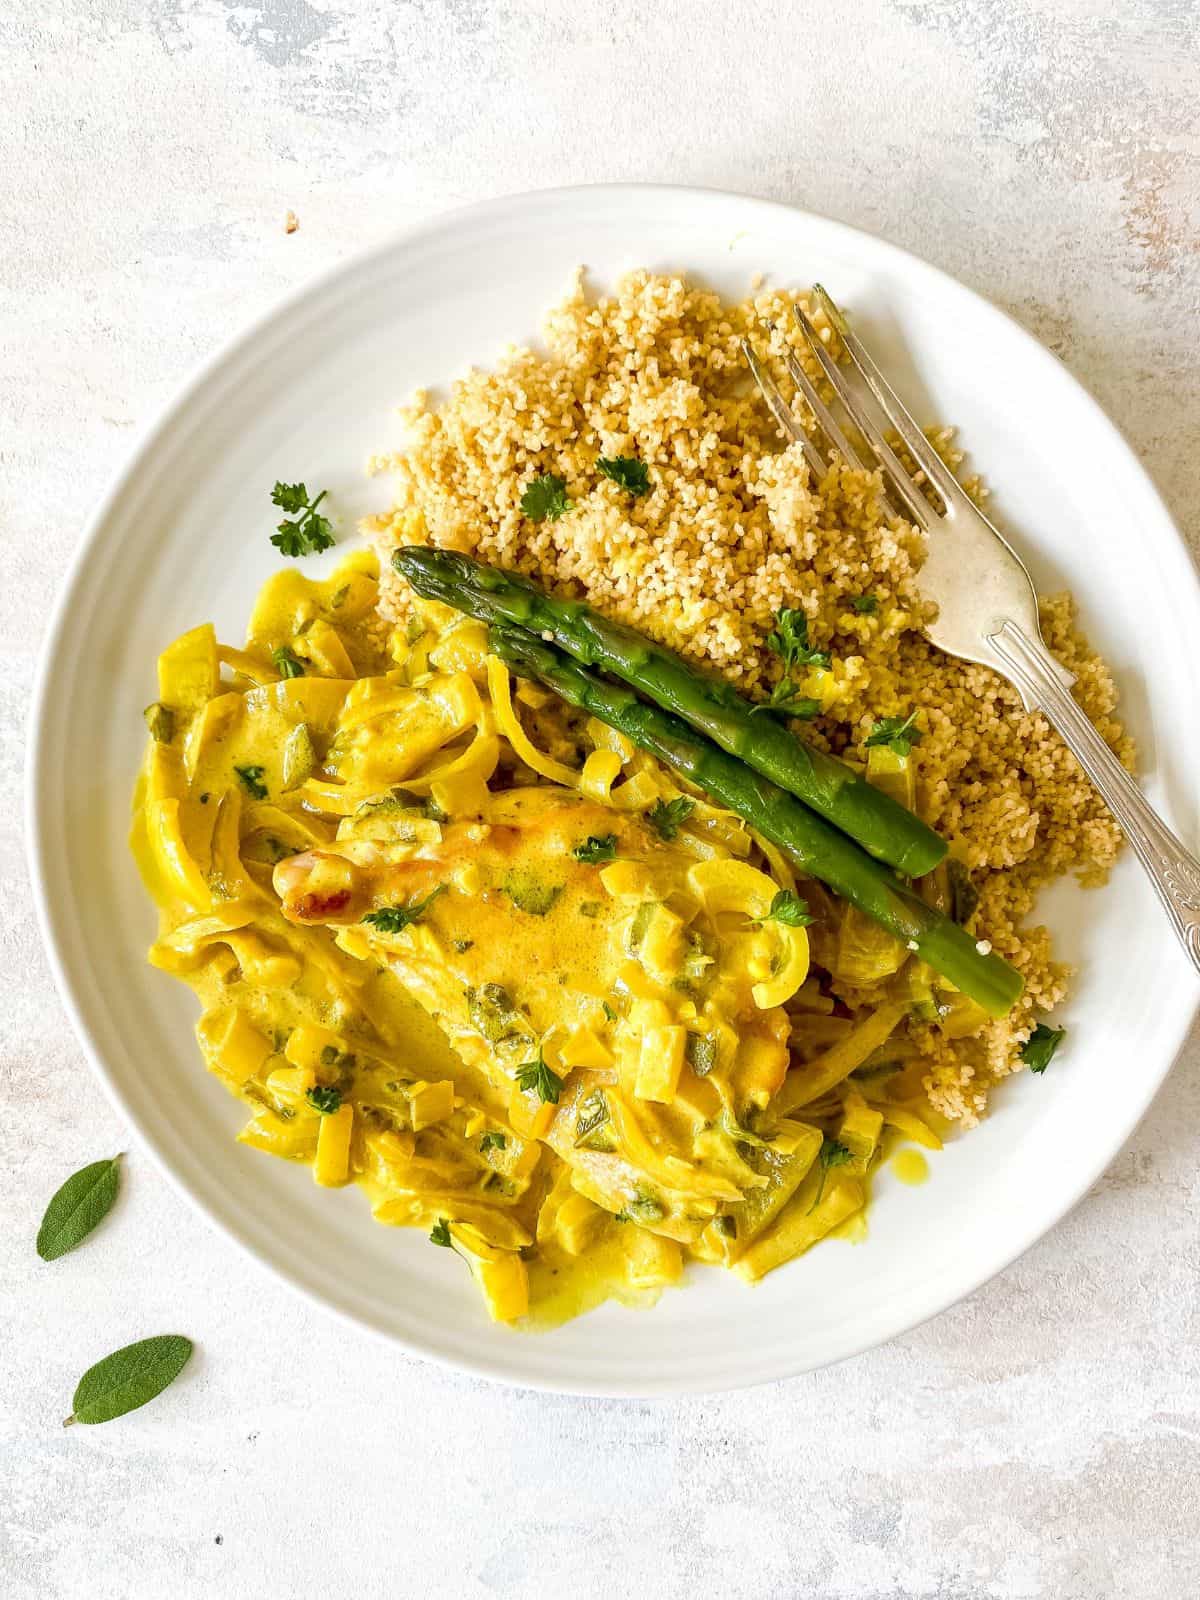 turkey with sage cream sauce on a plate with couscous and asparagus and a fork.